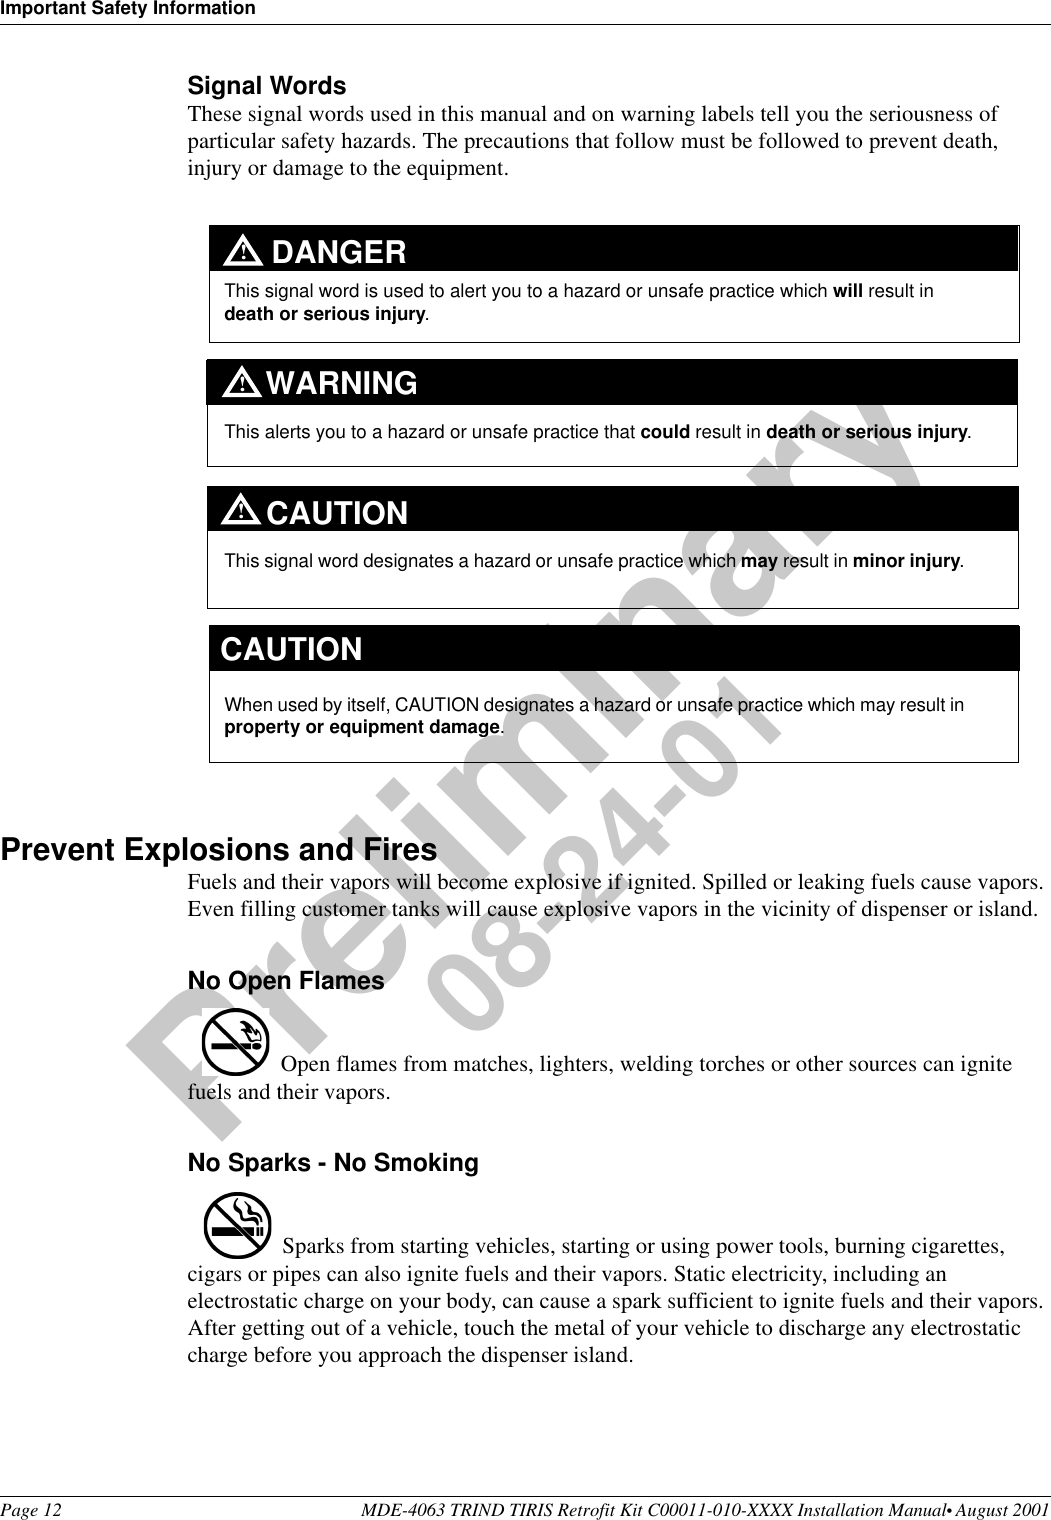 Important Safety InformationPage 12 MDE-4063 TRIND TIRIS Retrofit Kit C00011-010-XXXX Installation Manual• August 2001Preliminary08-24-01Signal WordsThese signal words used in this manual and on warning labels tell you the seriousness of particular safety hazards. The precautions that follow must be followed to prevent death, injury or damage to the equipment. Prevent Explosions and FiresFuels and their vapors will become explosive if ignited. Spilled or leaking fuels cause vapors. Even filling customer tanks will cause explosive vapors in the vicinity of dispenser or island.No Open FlamesOpen flames from matches, lighters, welding torches or other sources can ignite fuels and their vapors.No Sparks - No SmokingSparks from starting vehicles, starting or using power tools, burning cigarettes, cigars or pipes can also ignite fuels and their vapors. Static electricity, including an electrostatic charge on your body, can cause a spark sufficient to ignite fuels and their vapors. After getting out of a vehicle, touch the metal of your vehicle to discharge any electrostatic charge before you approach the dispenser island.This signal word designates a hazard or unsafe practice which may result in minor injury.This signal word is used to alert you to a hazard or unsafe practice which will result in death or serious injury.This alerts you to a hazard or unsafe practice that could result in death or serious injury.CAUTIONWhen used by itself, CAUTION designates a hazard or unsafe practice which may result in property or equipment damage.CAUTIONDANGERWARNING!!!